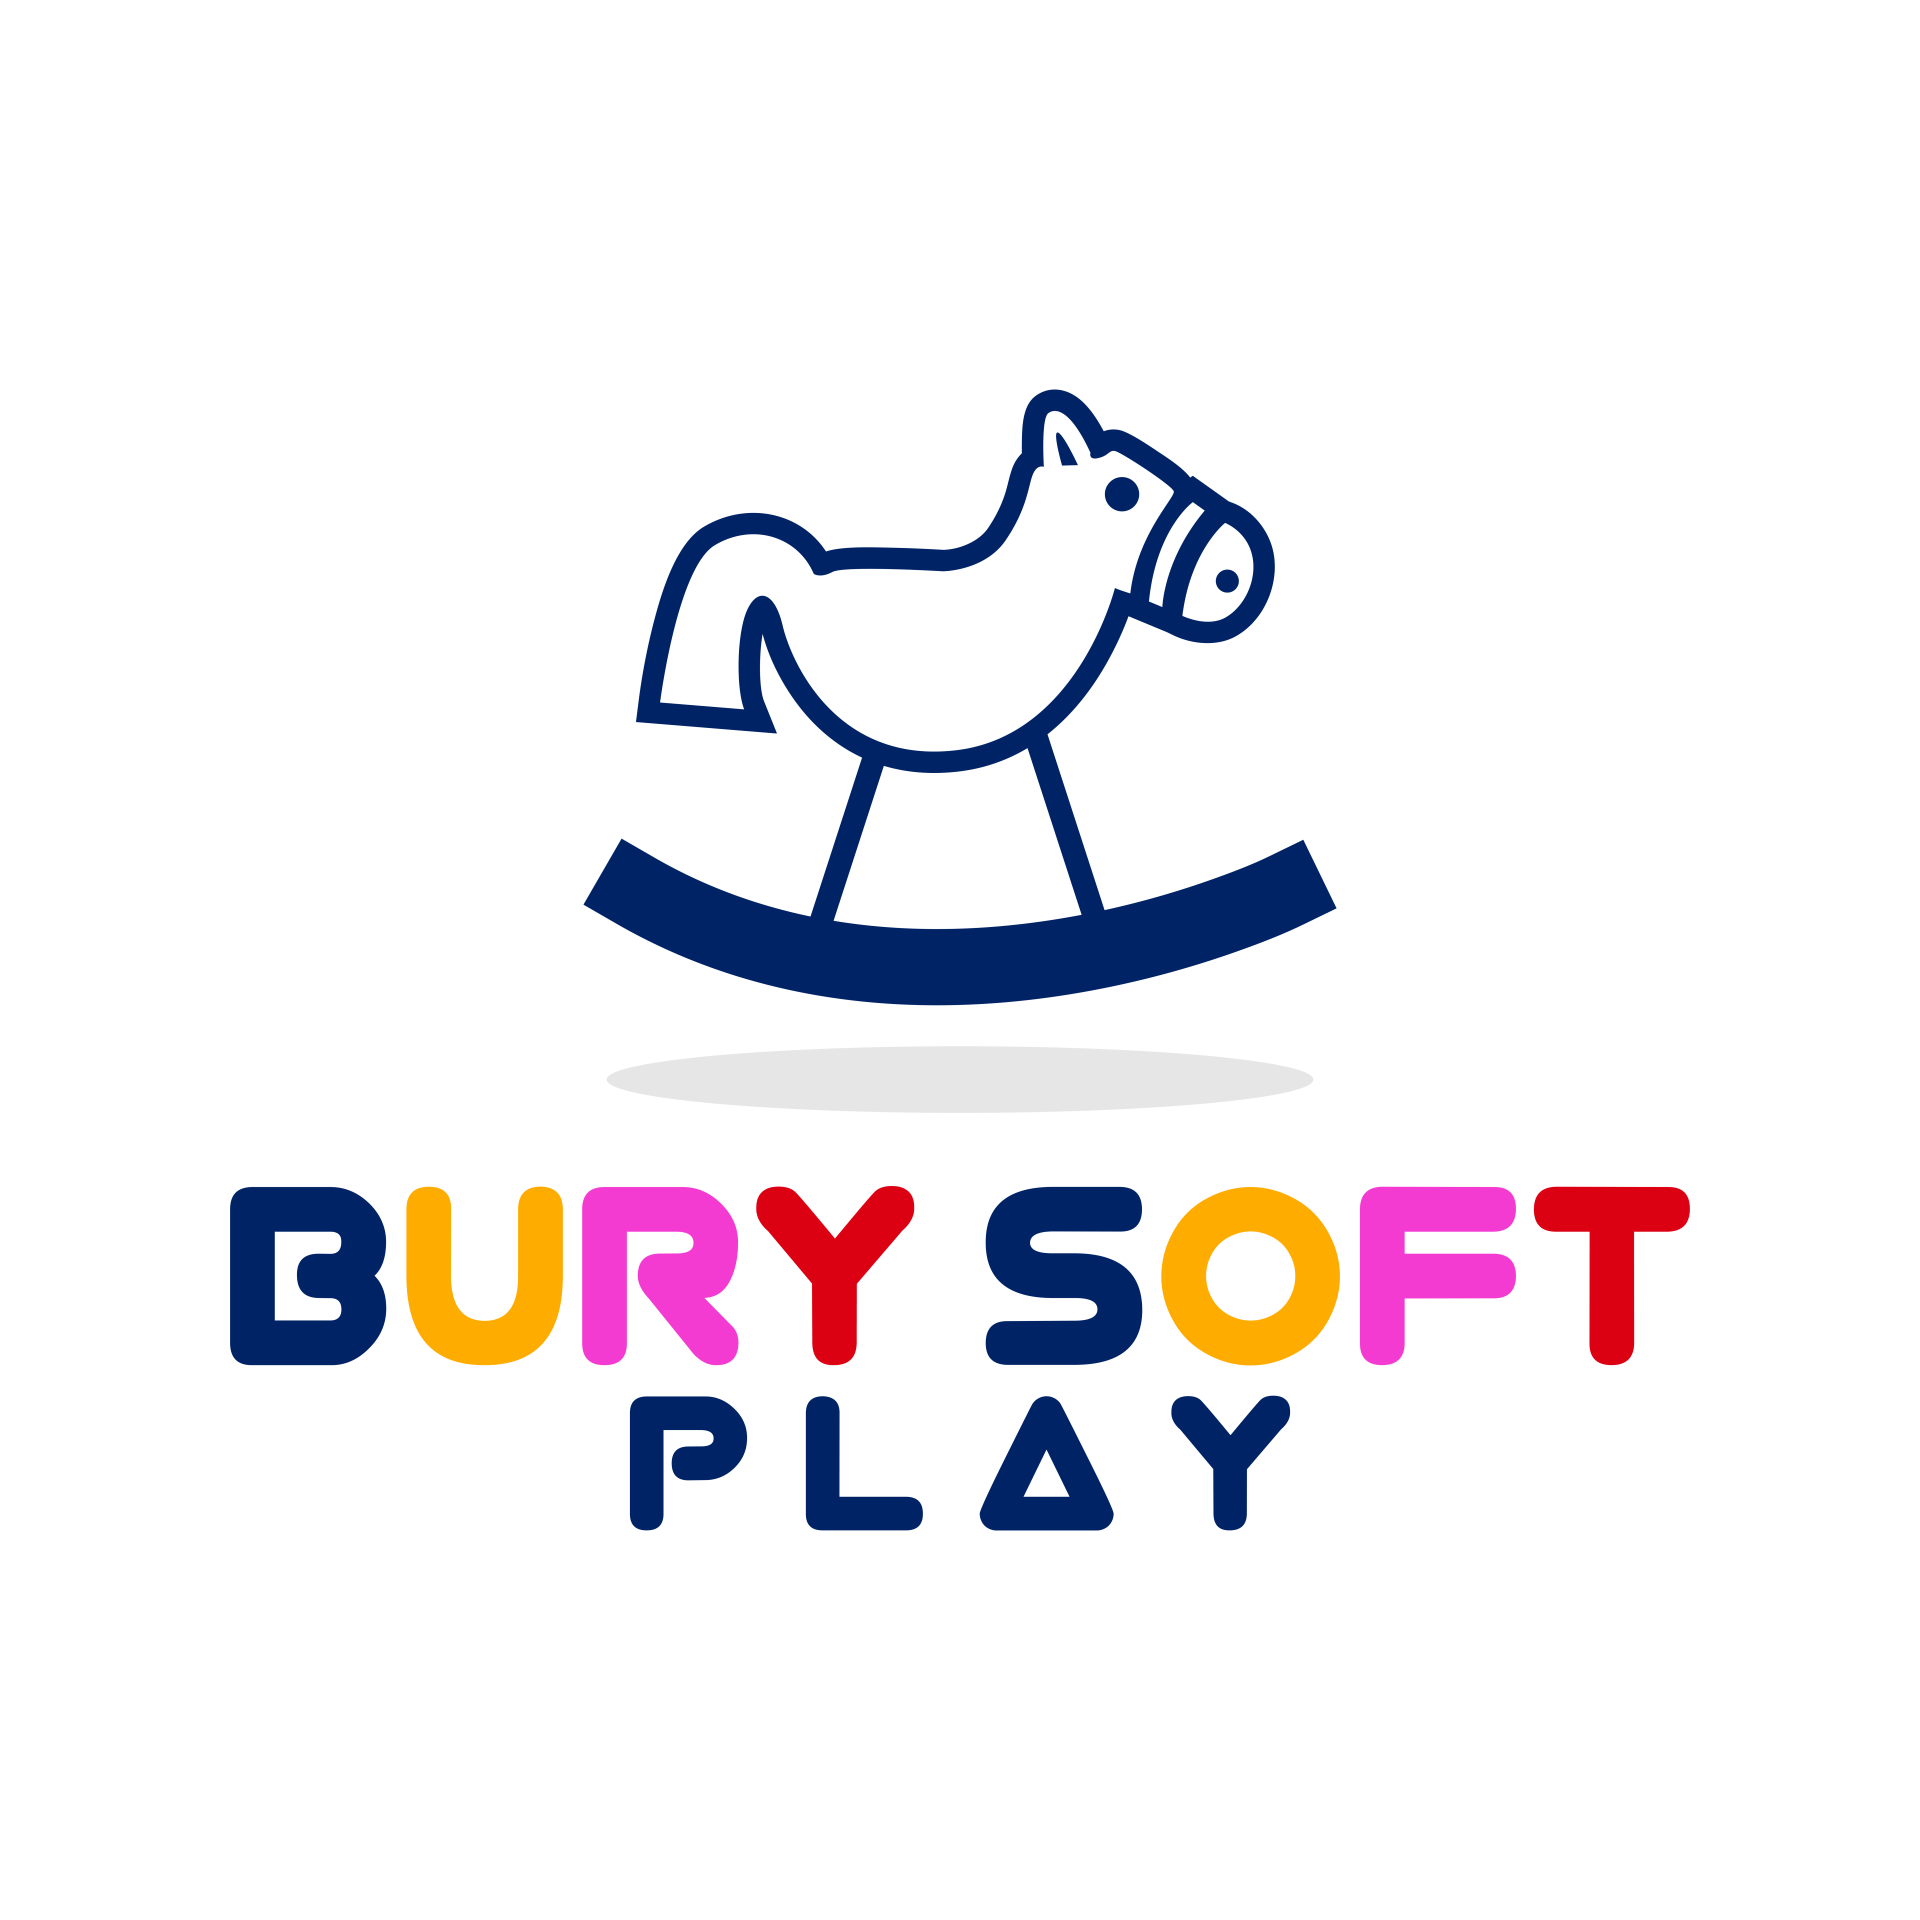 Bury Soft Play, The Home of Premium Soft Play Hire